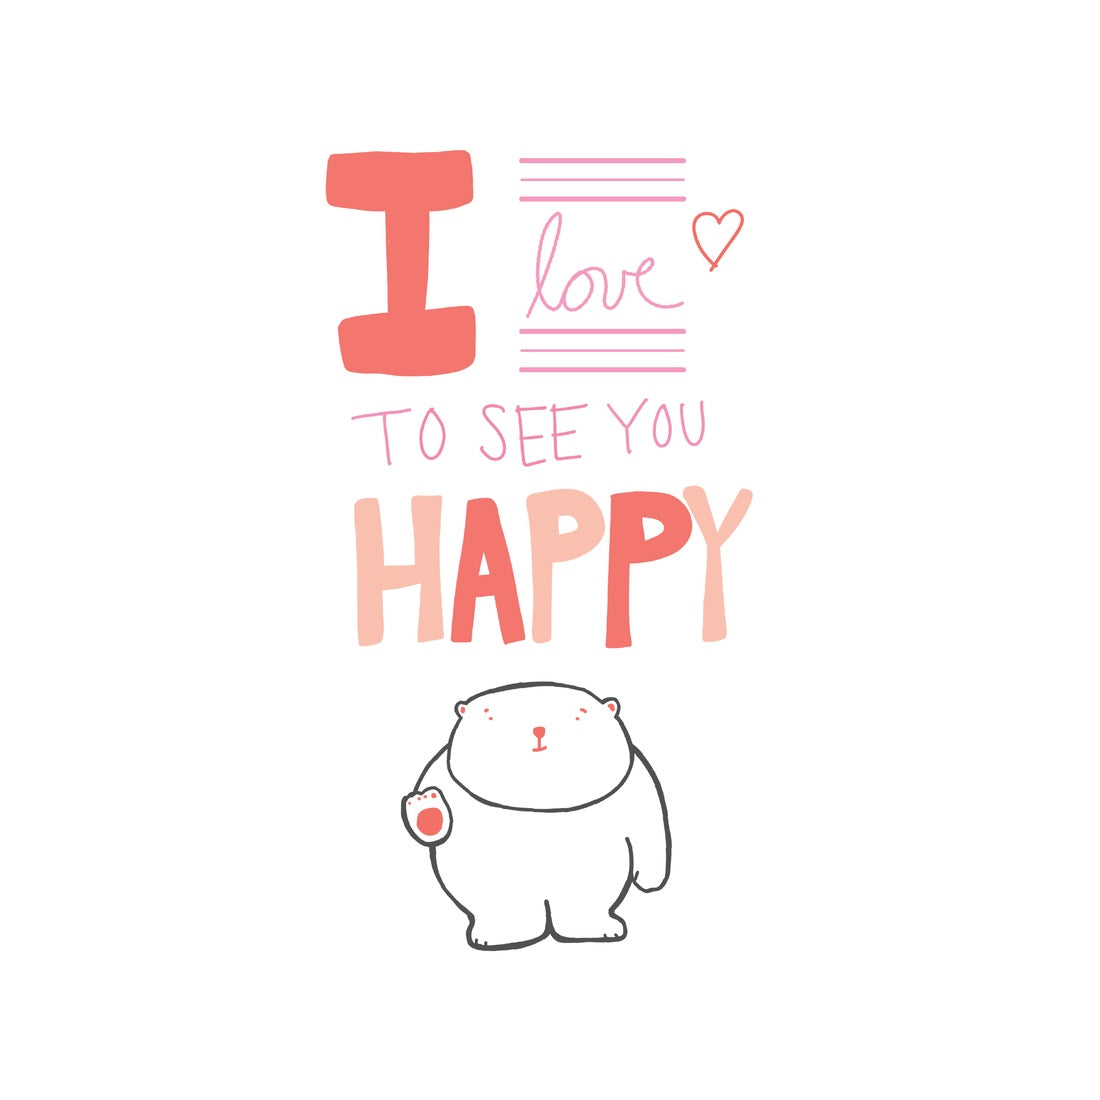 I LOVE TO SEE YOU HAPPY GREETING CARD